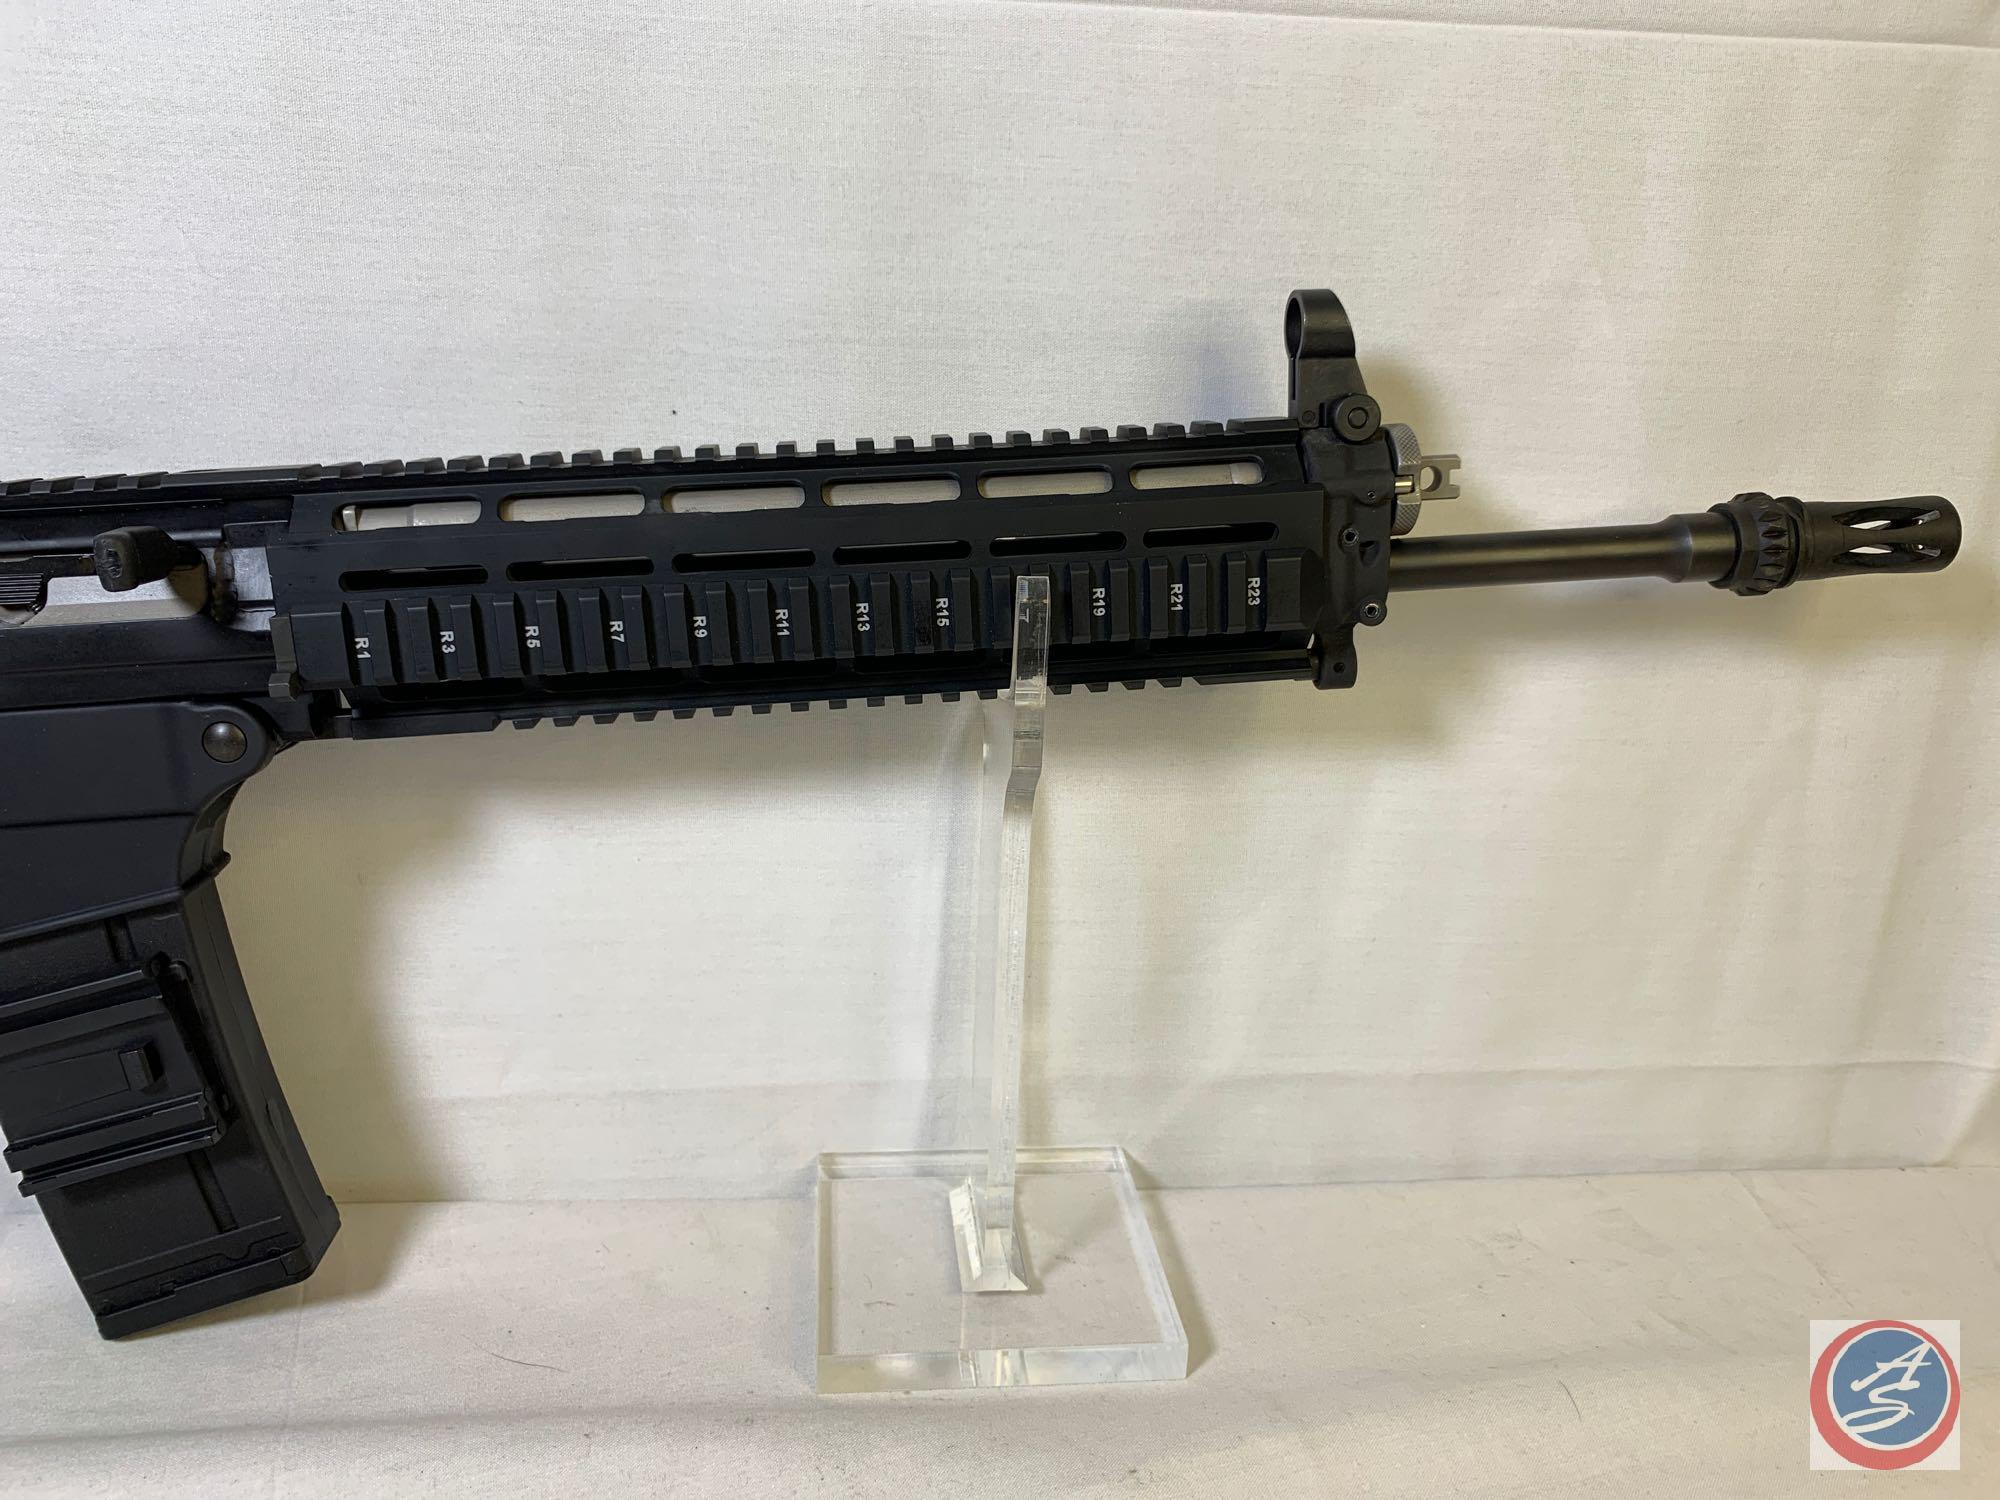 Sig Sauer model Sig556 556 Rifle Semi Auto Rifle with folding stock factory rotary diopter sight, 2